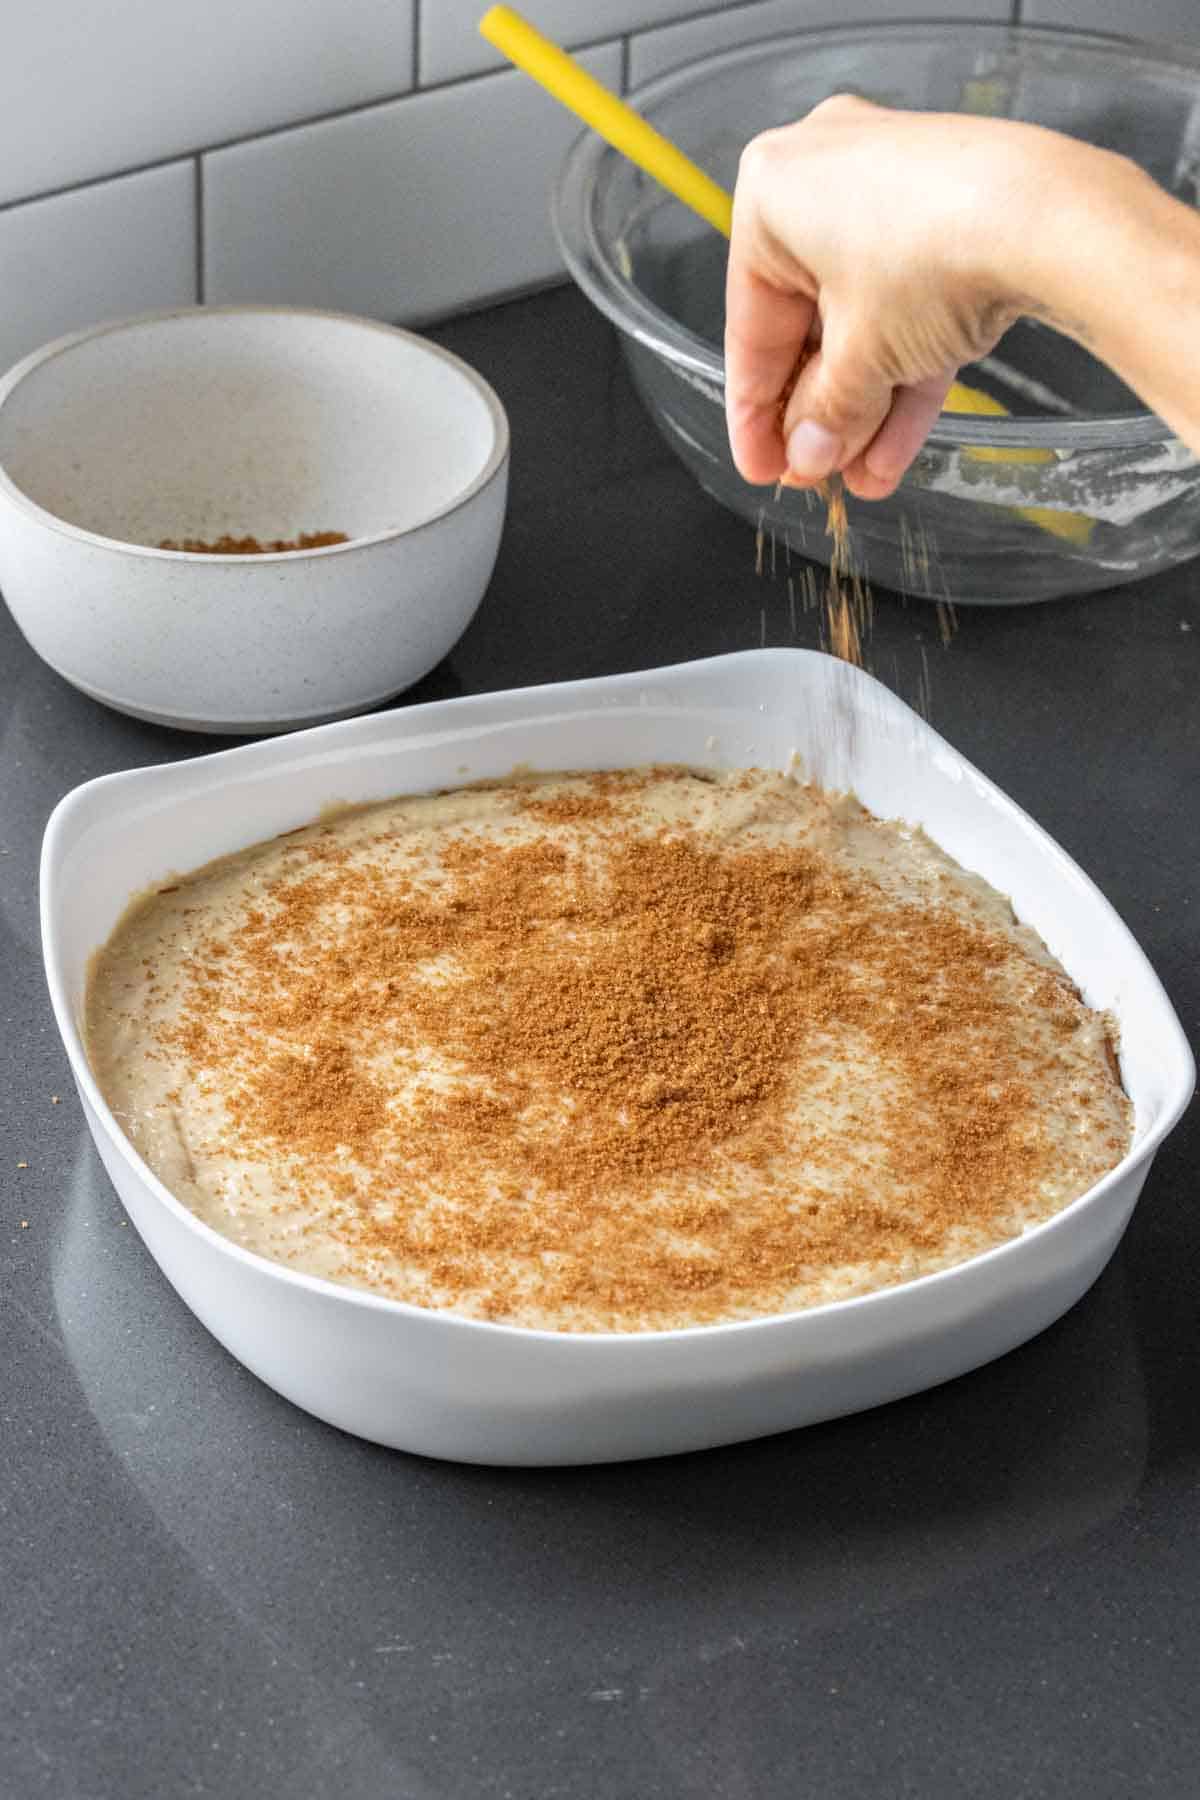 A hand dropping brown sugar on top of a cake batter in a white cake pan that is on a kitchen counter.